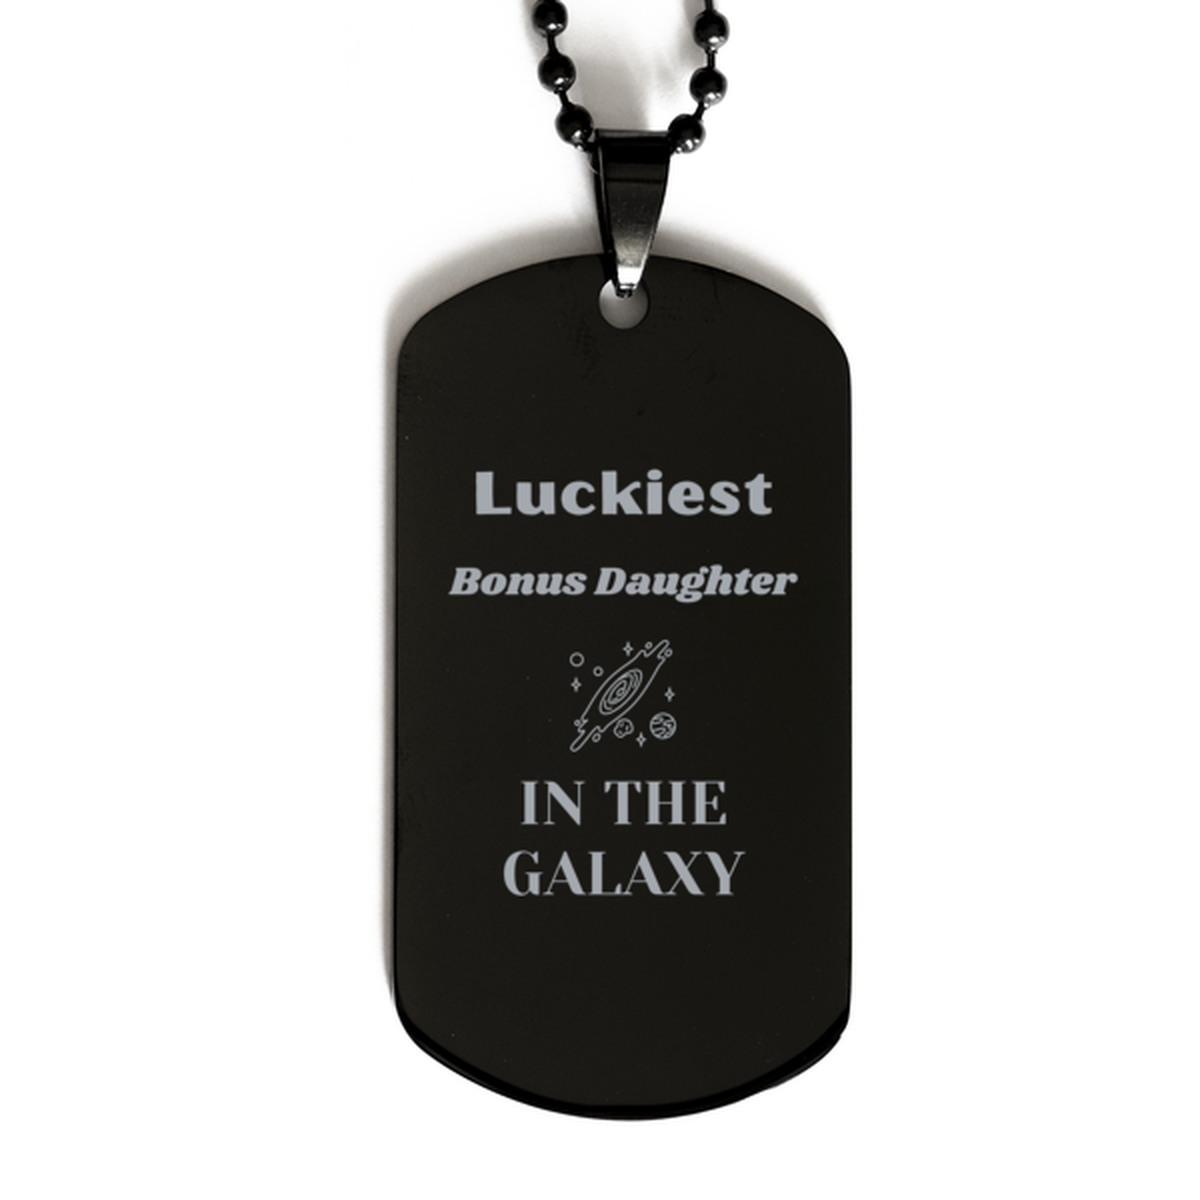 Luckiest Bonus Daughter in the Galaxy, To My Bonus Daughter Engraved Gifts, Christmas Bonus Daughter Black Dog Tag Gifts, X-mas Birthday Unique Gifts For Bonus Daughter Men Women